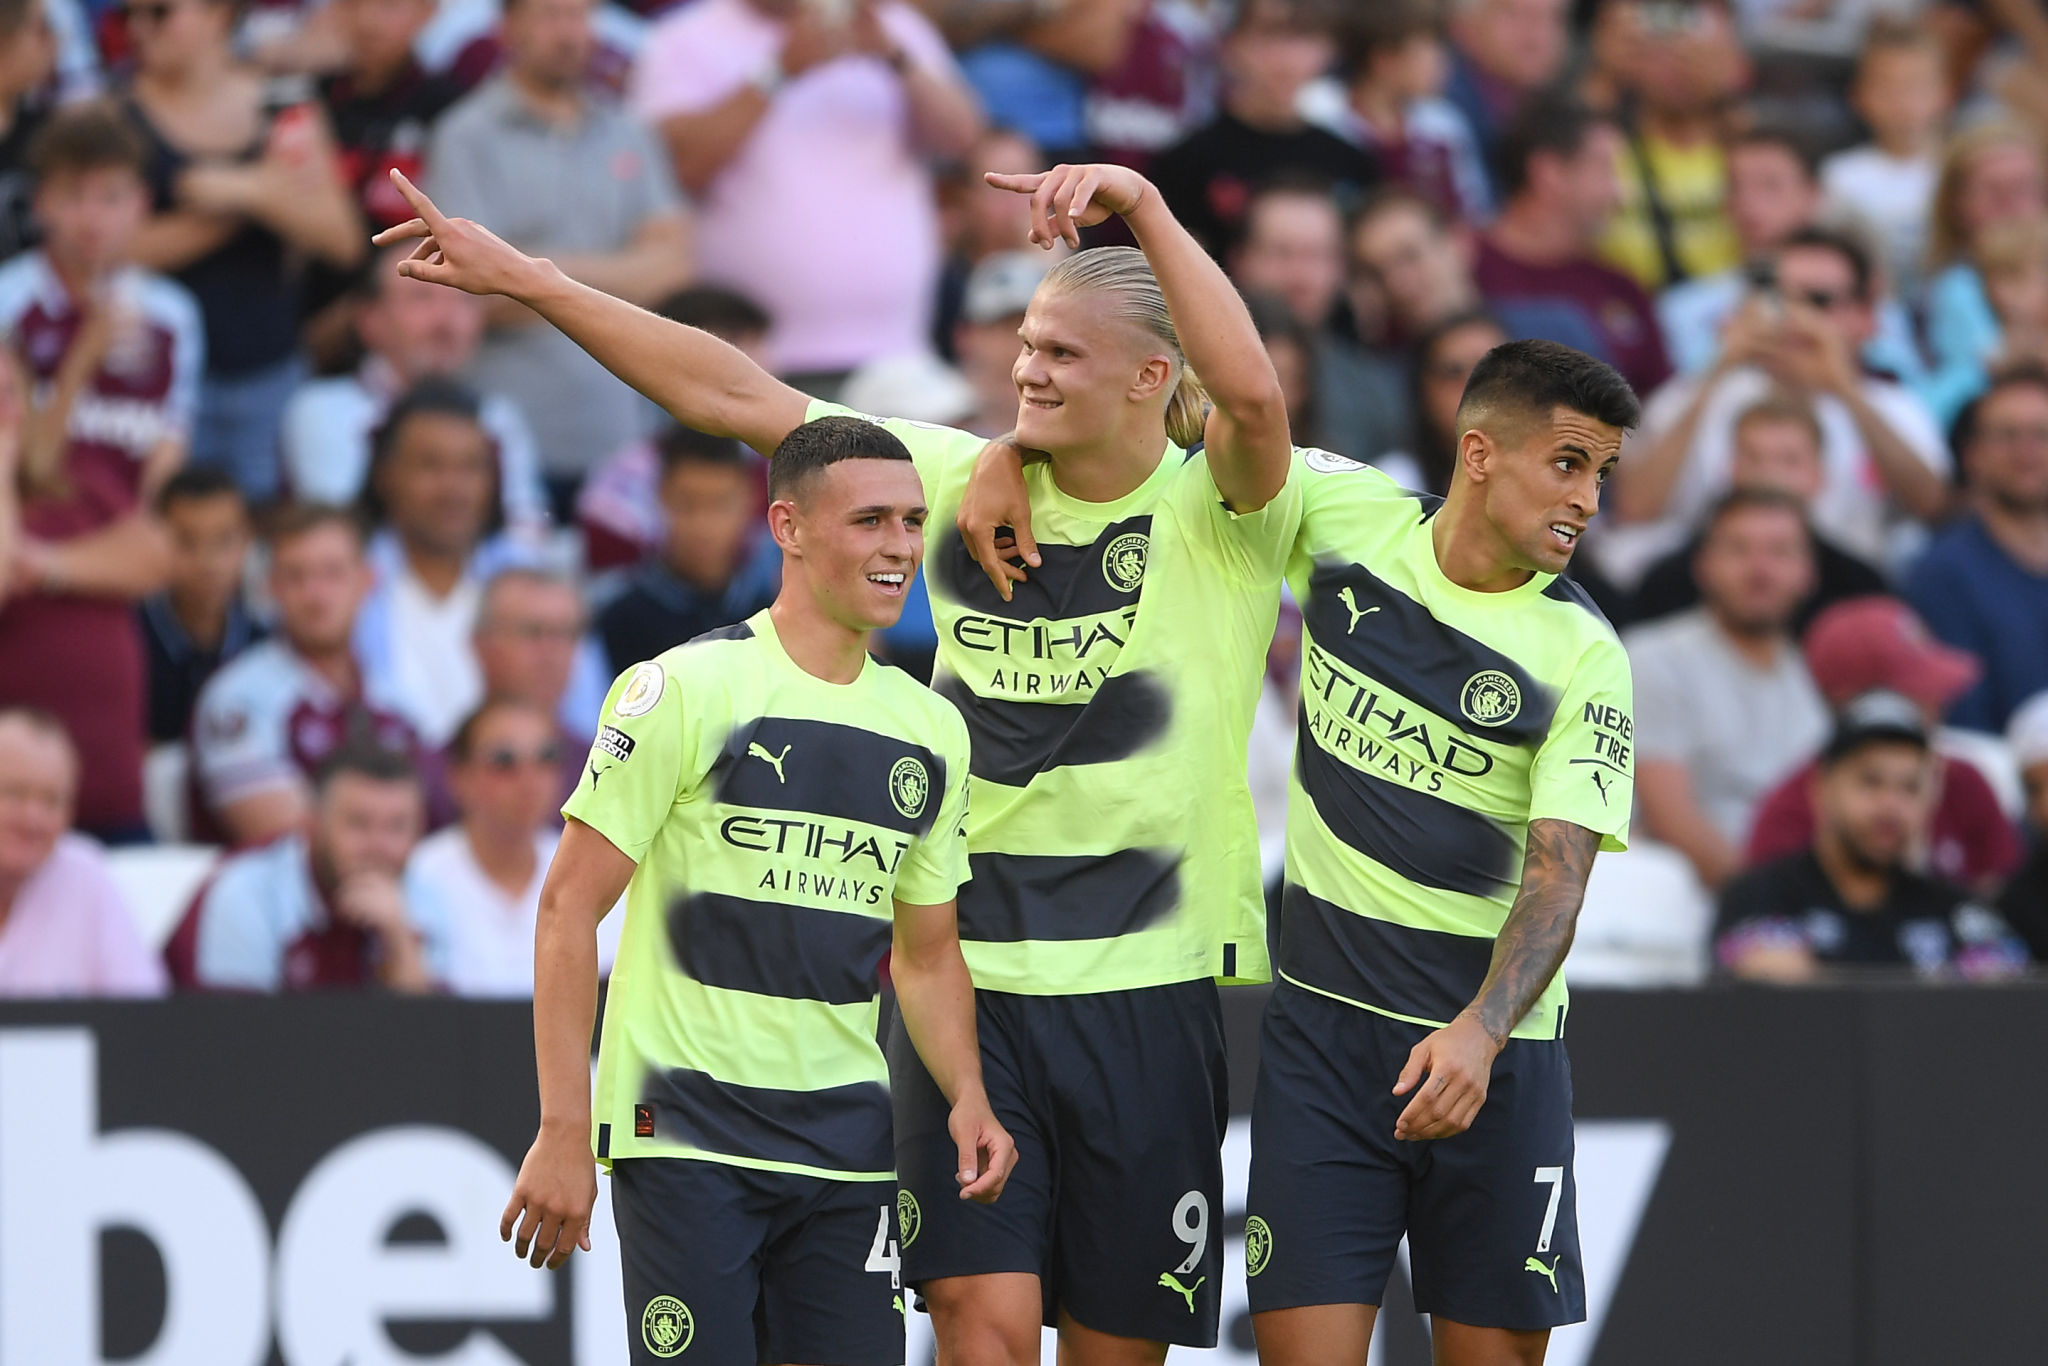 Manchester City Season 2022: All you want to know about Man City earnings, sponsors, full schedule and Manchester City squad for Premier League Season 2022-23: Follow Premier League LIVE UPDATES